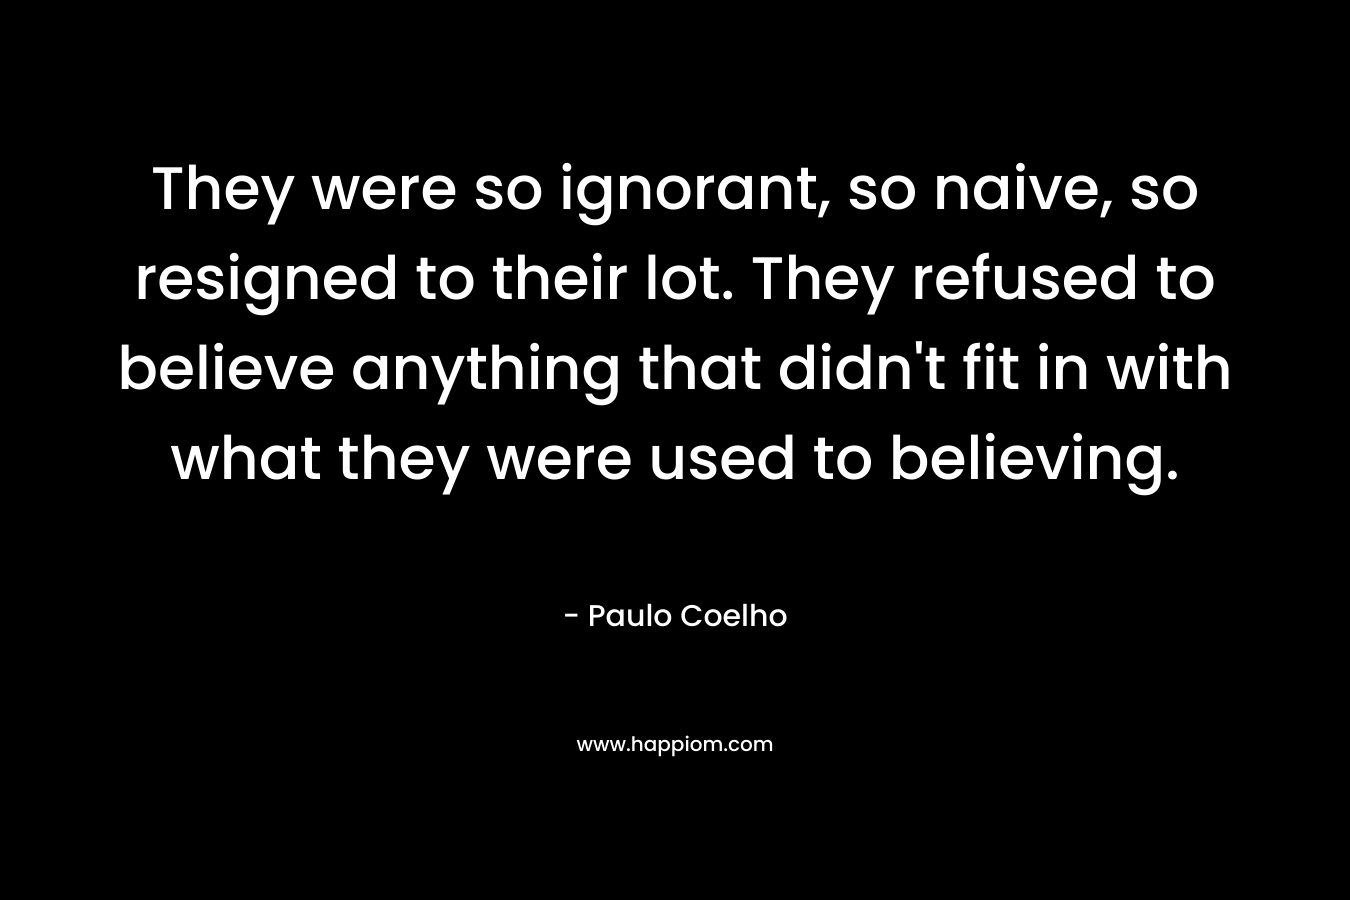 They were so ignorant, so naive, so resigned to their lot. They refused to believe anything that didn’t fit in with what they were used to believing. – Paulo Coelho